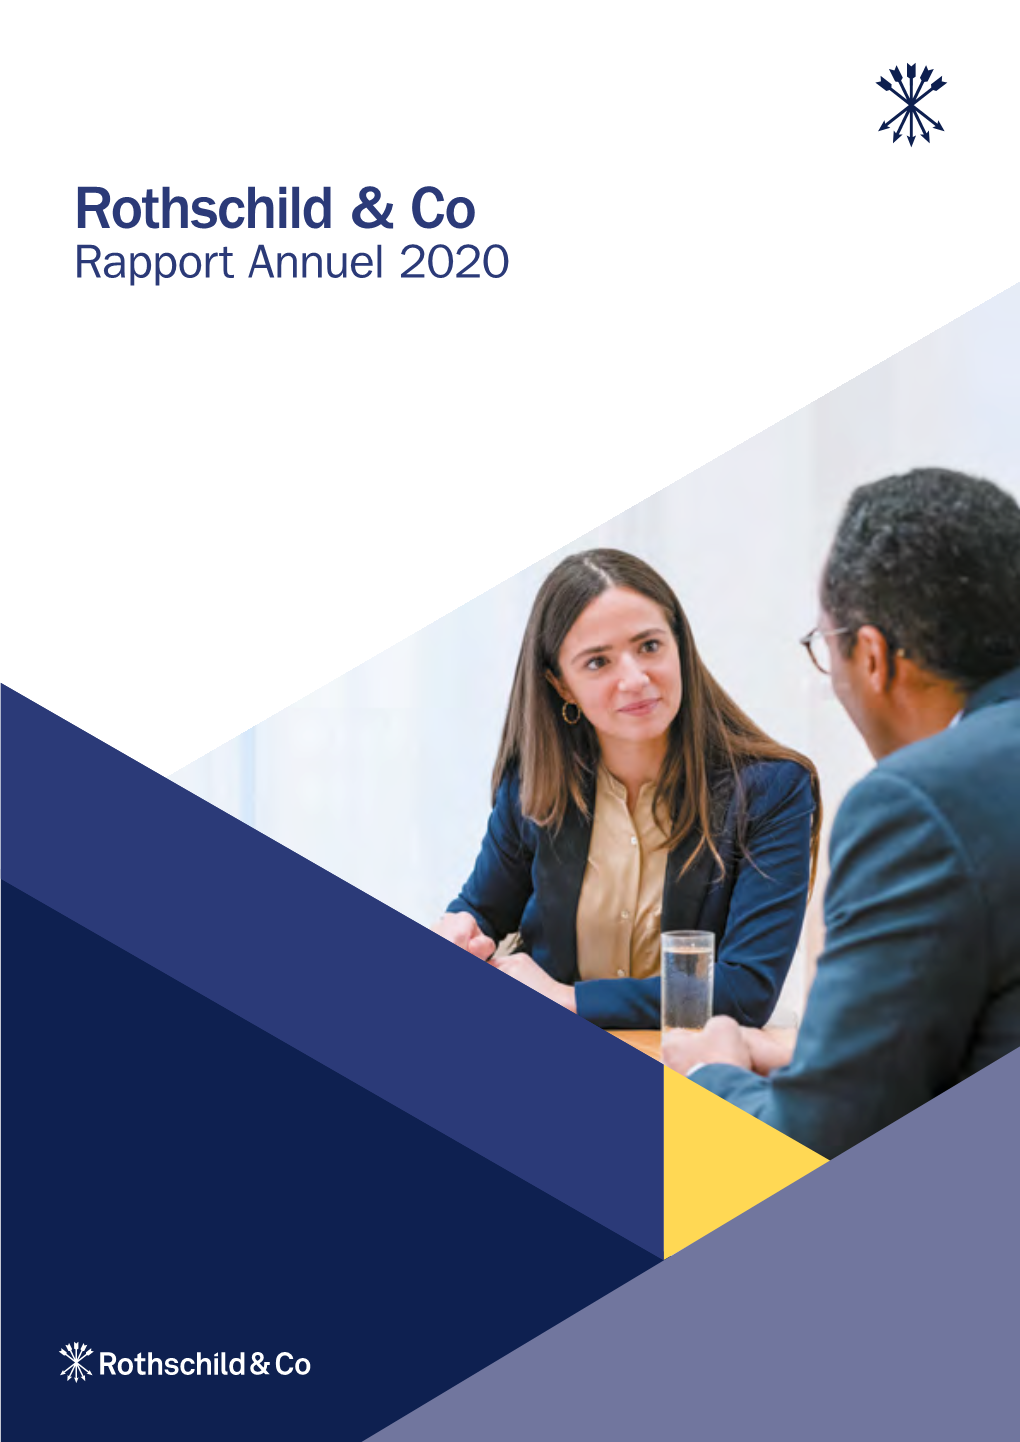 Rothschild & Co : Rapport Annuel 2020